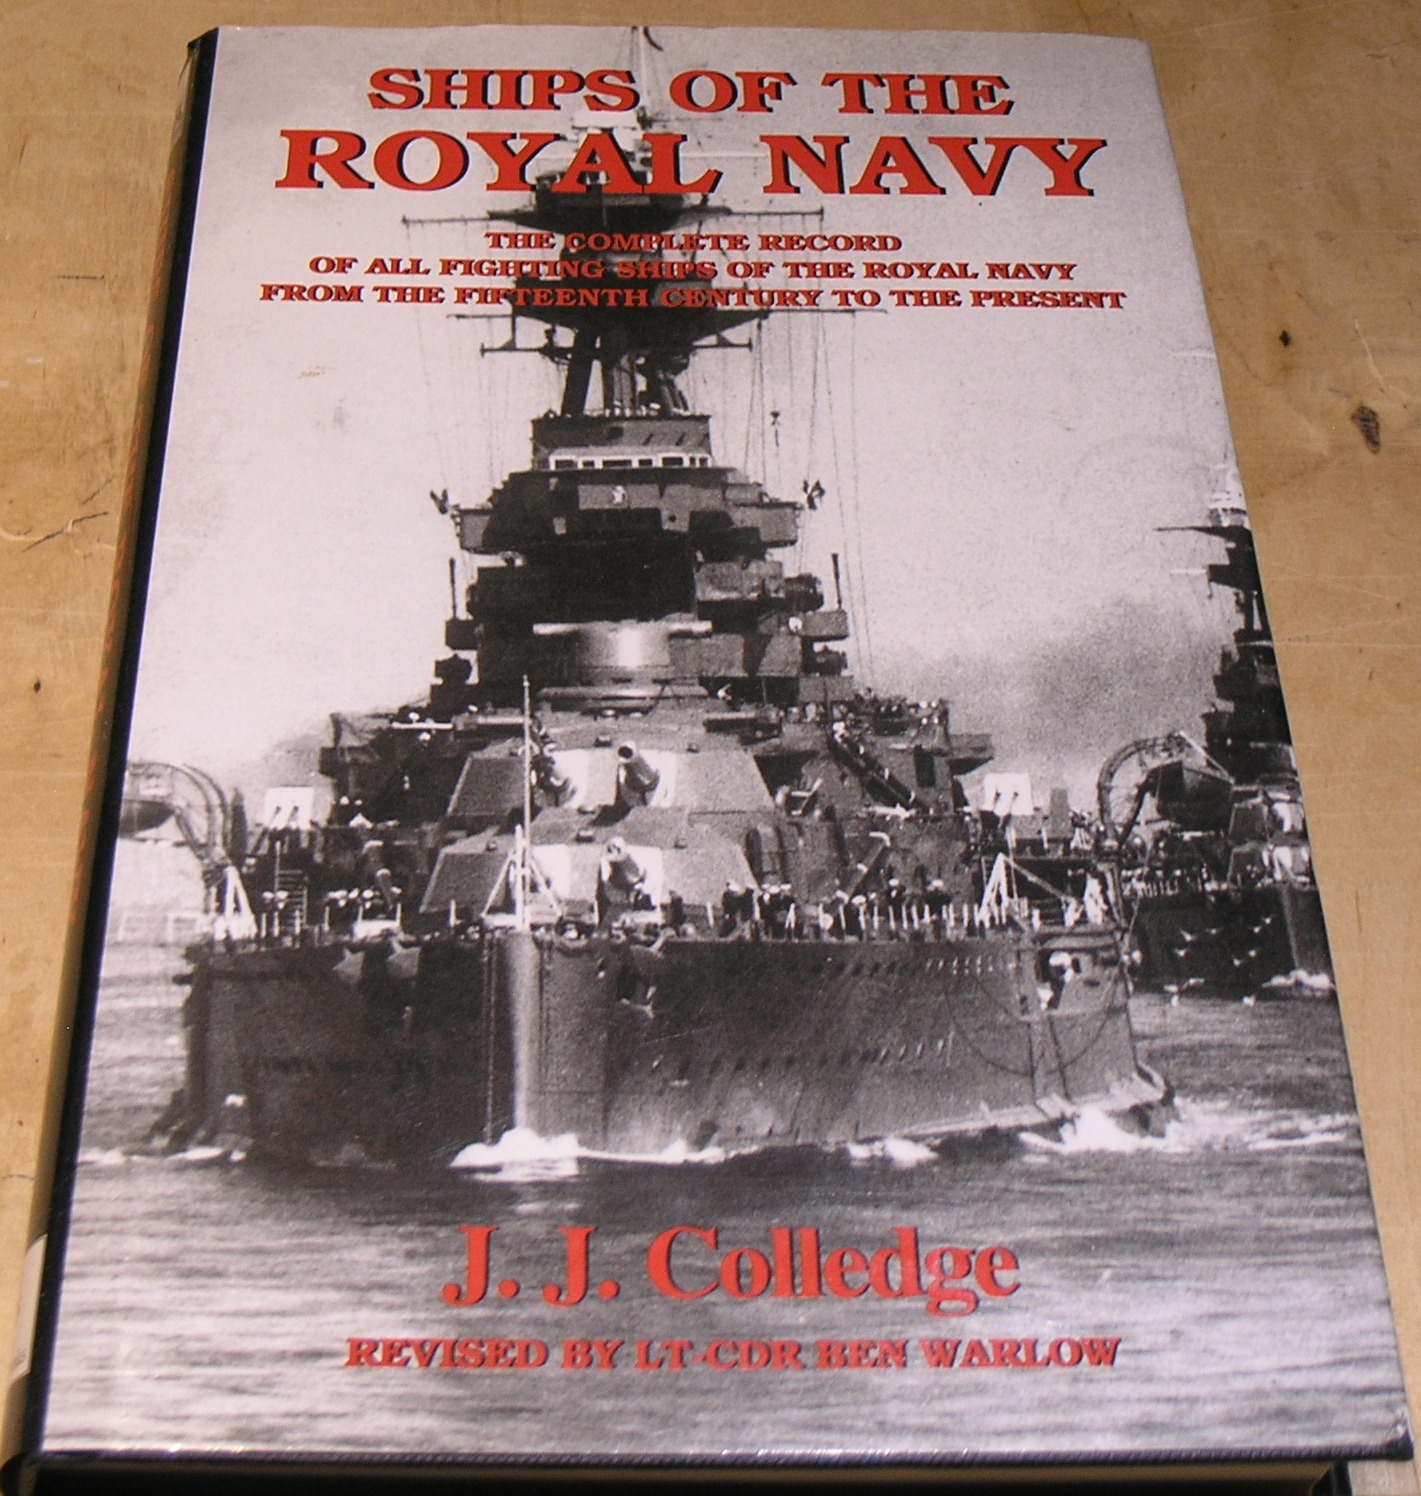 Ships of the Royal Navy; the complete record of all fighting ships of the Royal Navy from the fifteenth century to the present. - Colledge. J.J. revised by Lt-Cdr Ben Warlow